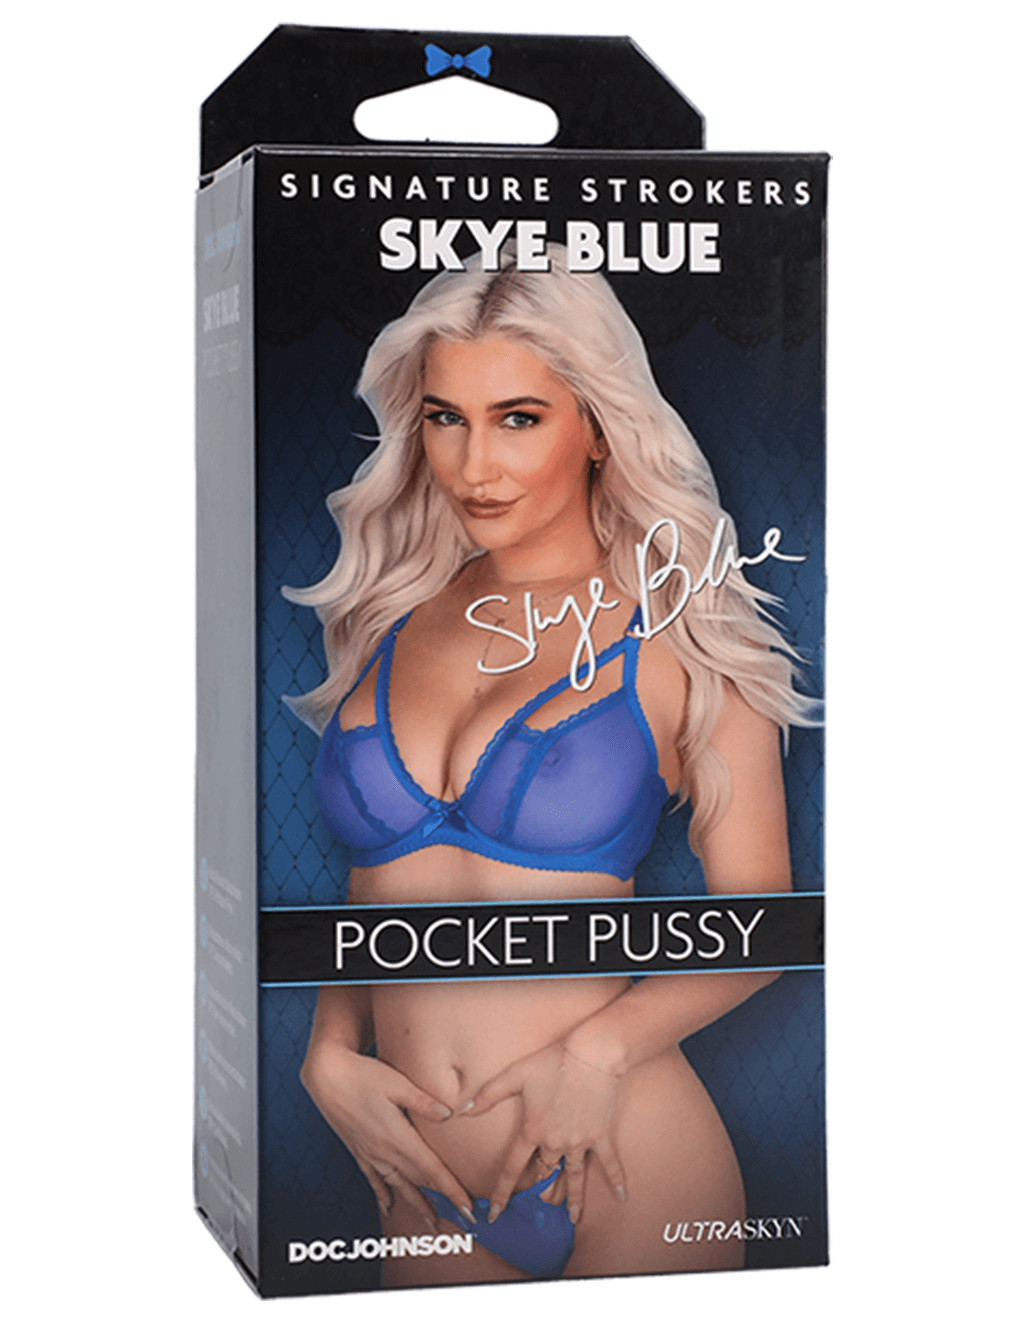 Signature Strokers Skye Blue Pocket Pussy